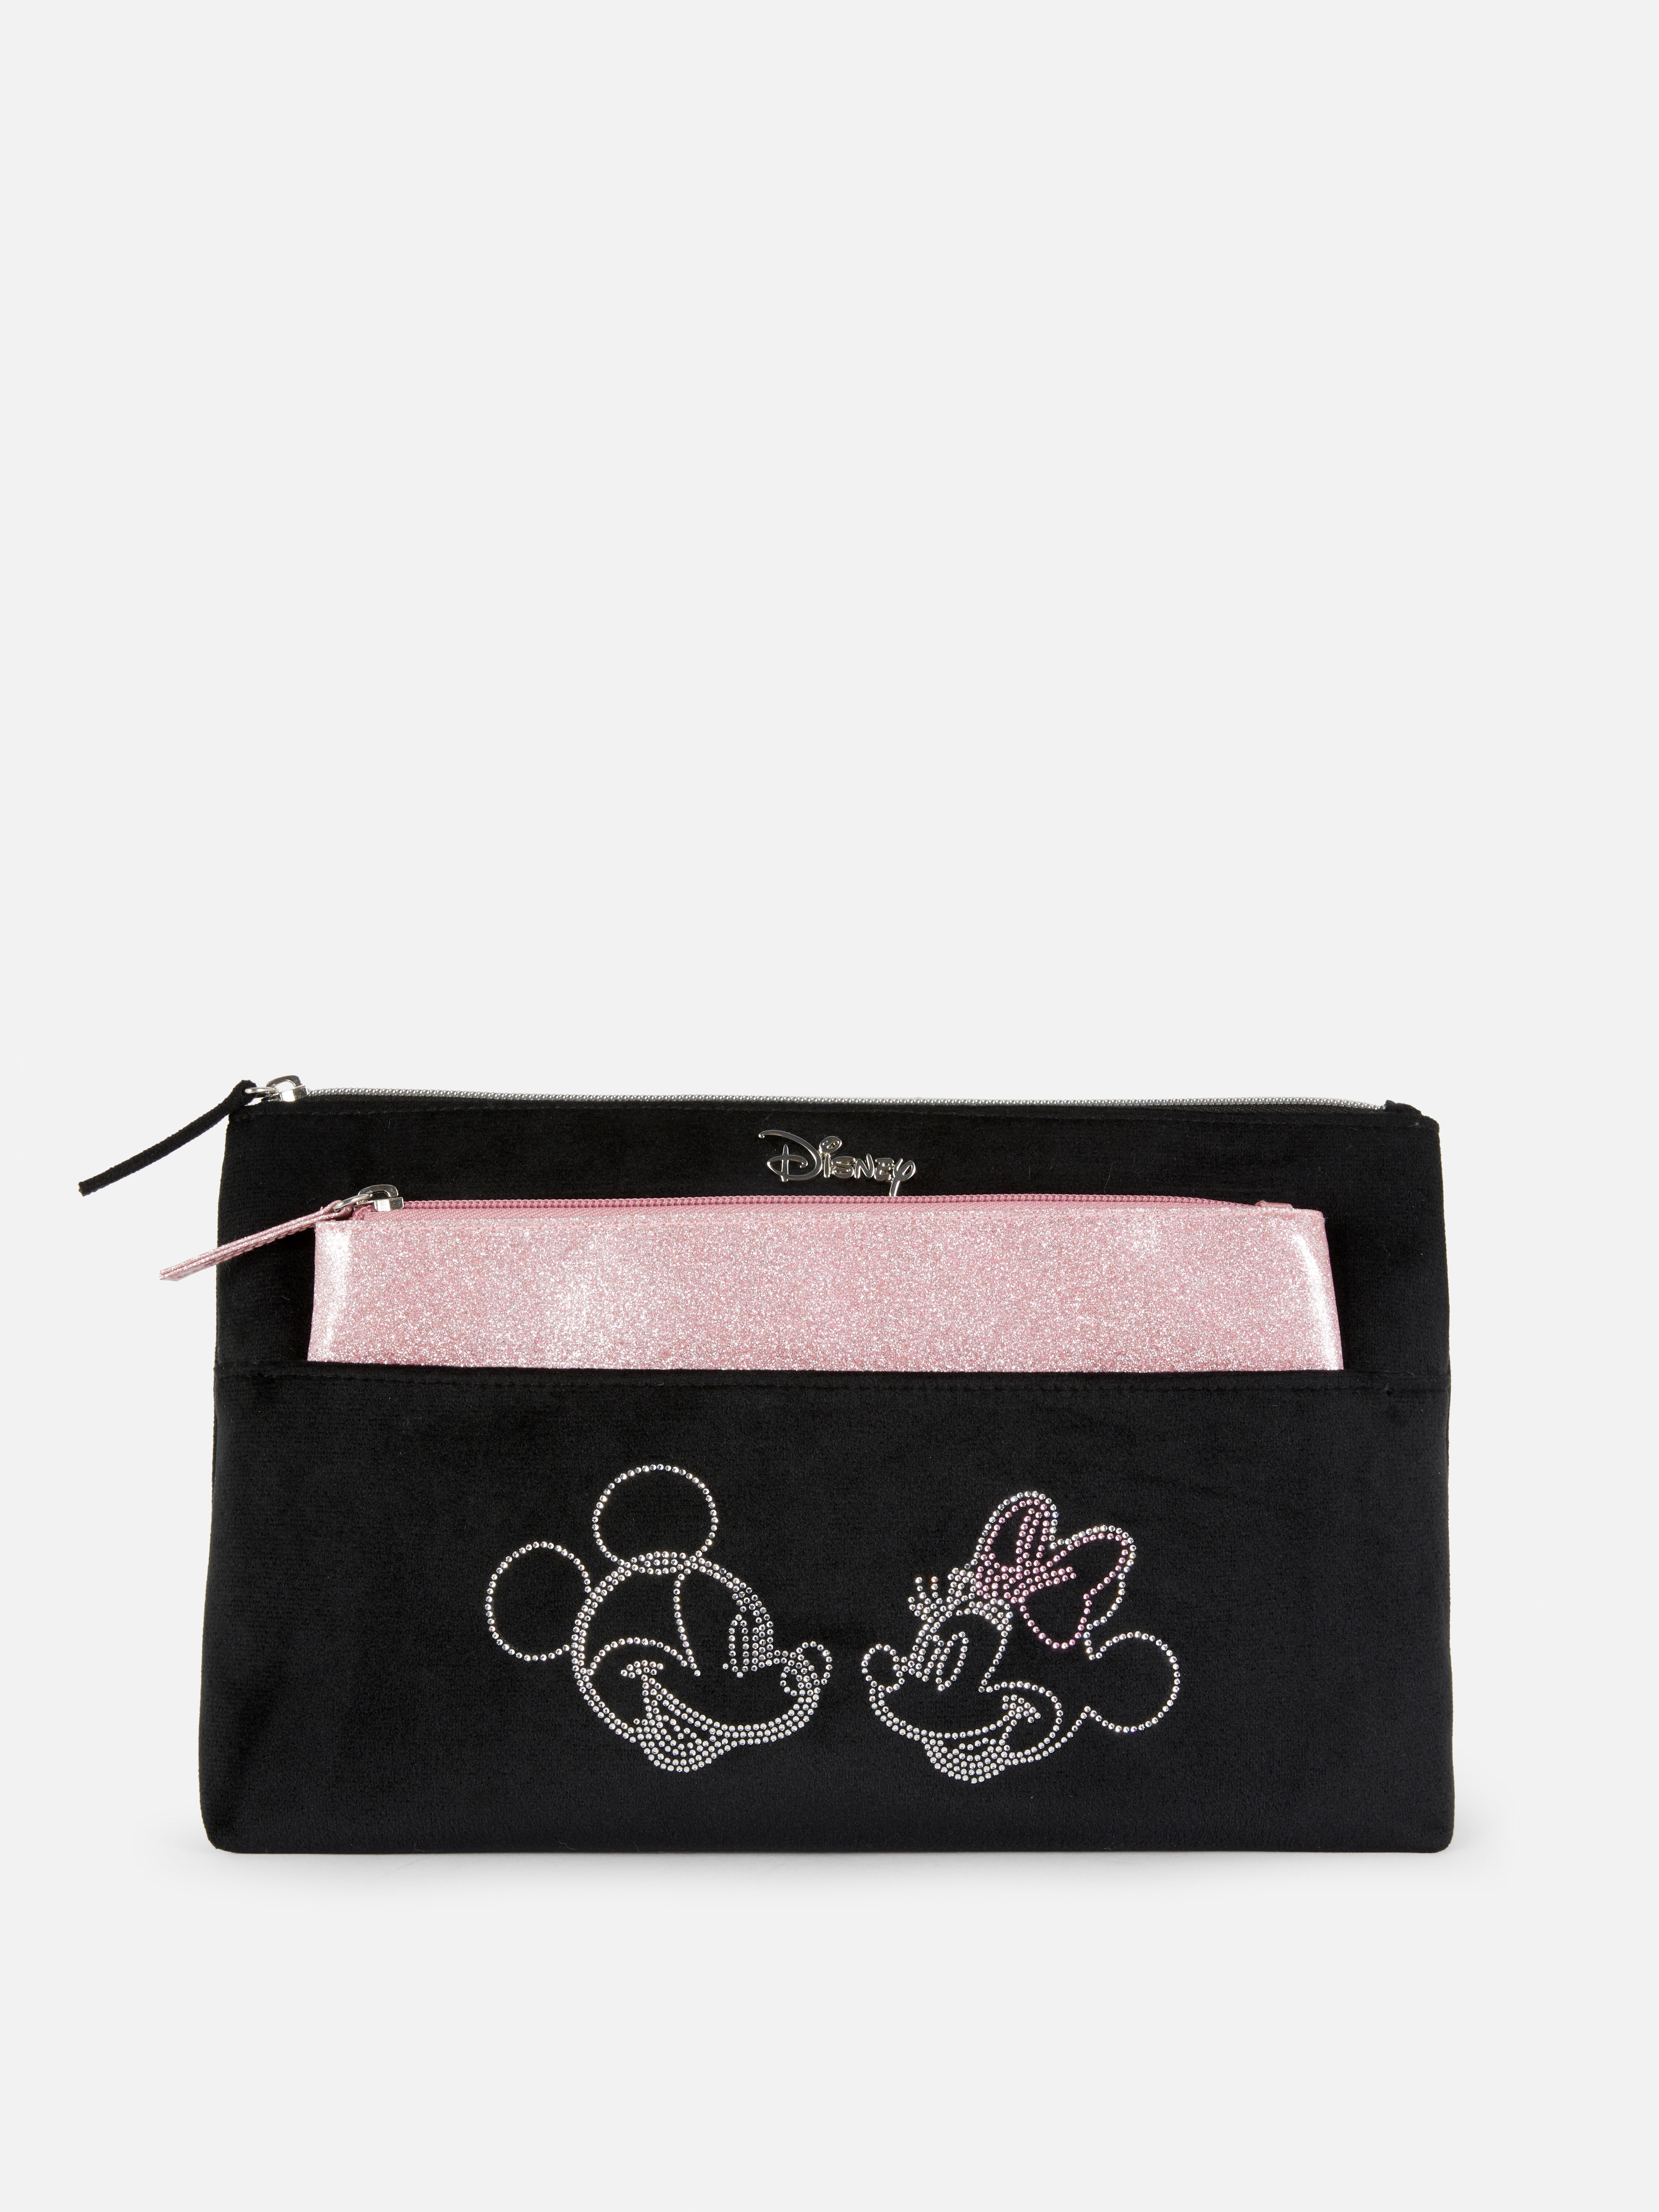 Disney’s Minnie Mouse Two-in-One Makeup Bag